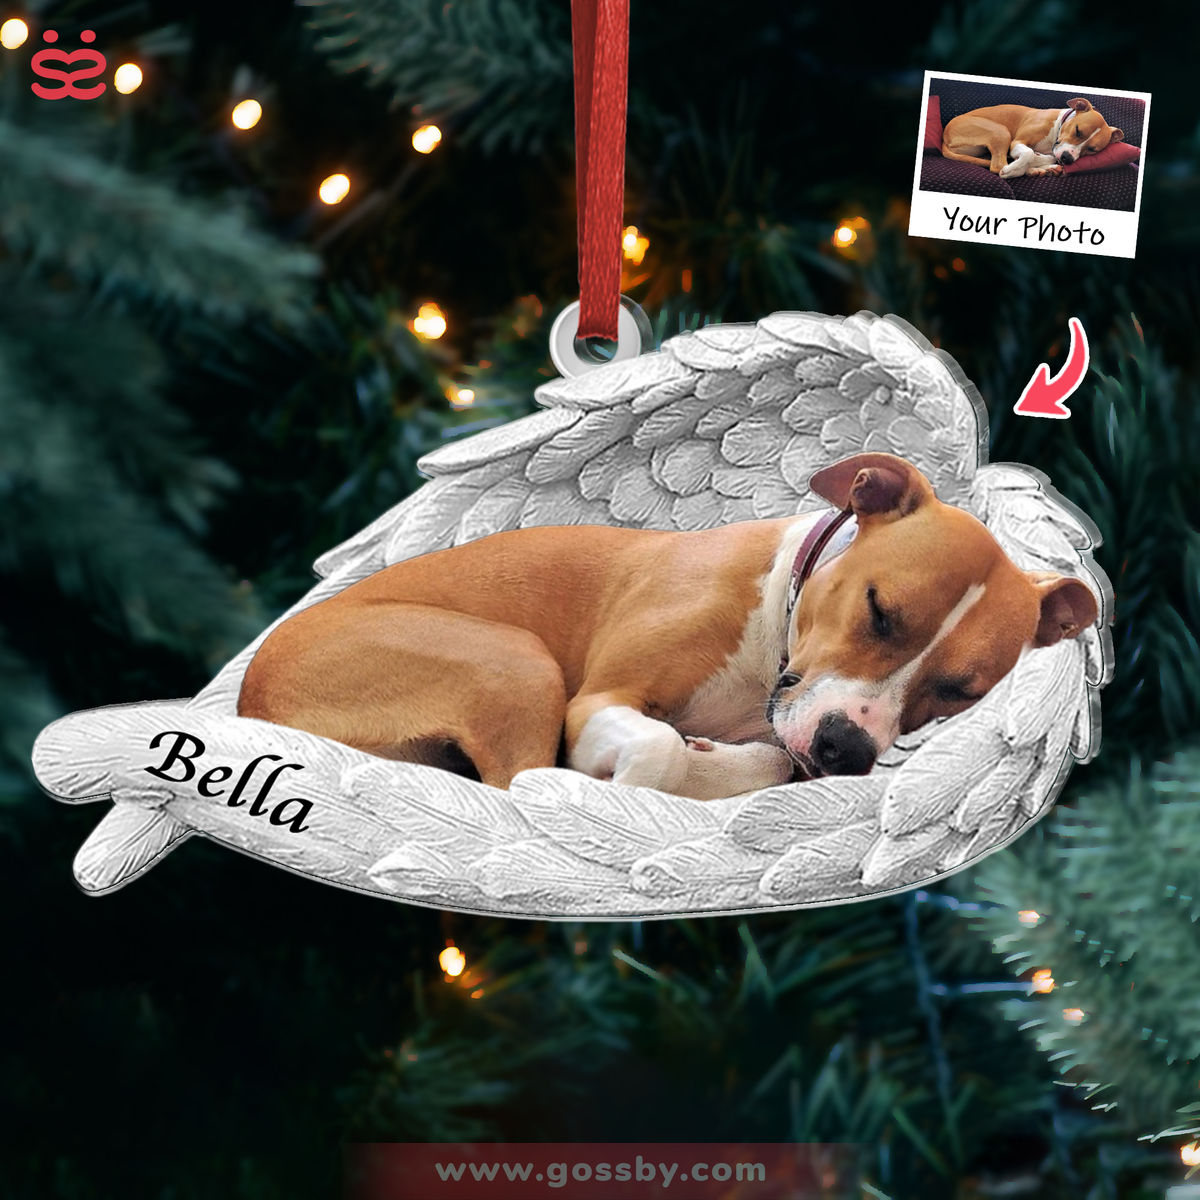 Dog Lovers - Sleeping Pet Within Angel Wings - Customized Your Photo Ornament, Custom Photo Gifts, Christmas Gifts